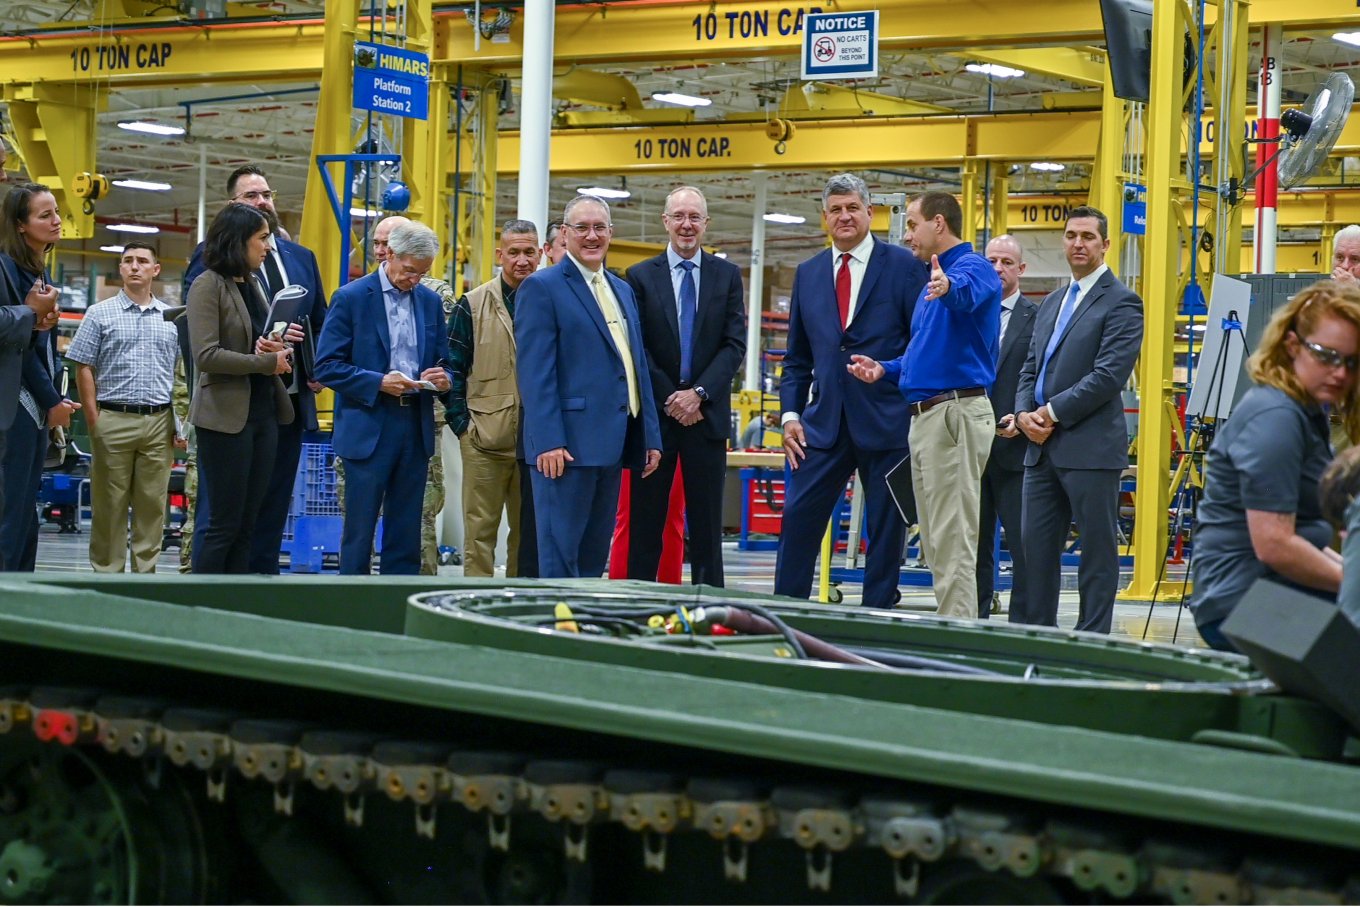 William LaPlante at the GMLRS and HIMARS manufacturing facility in Arkansas